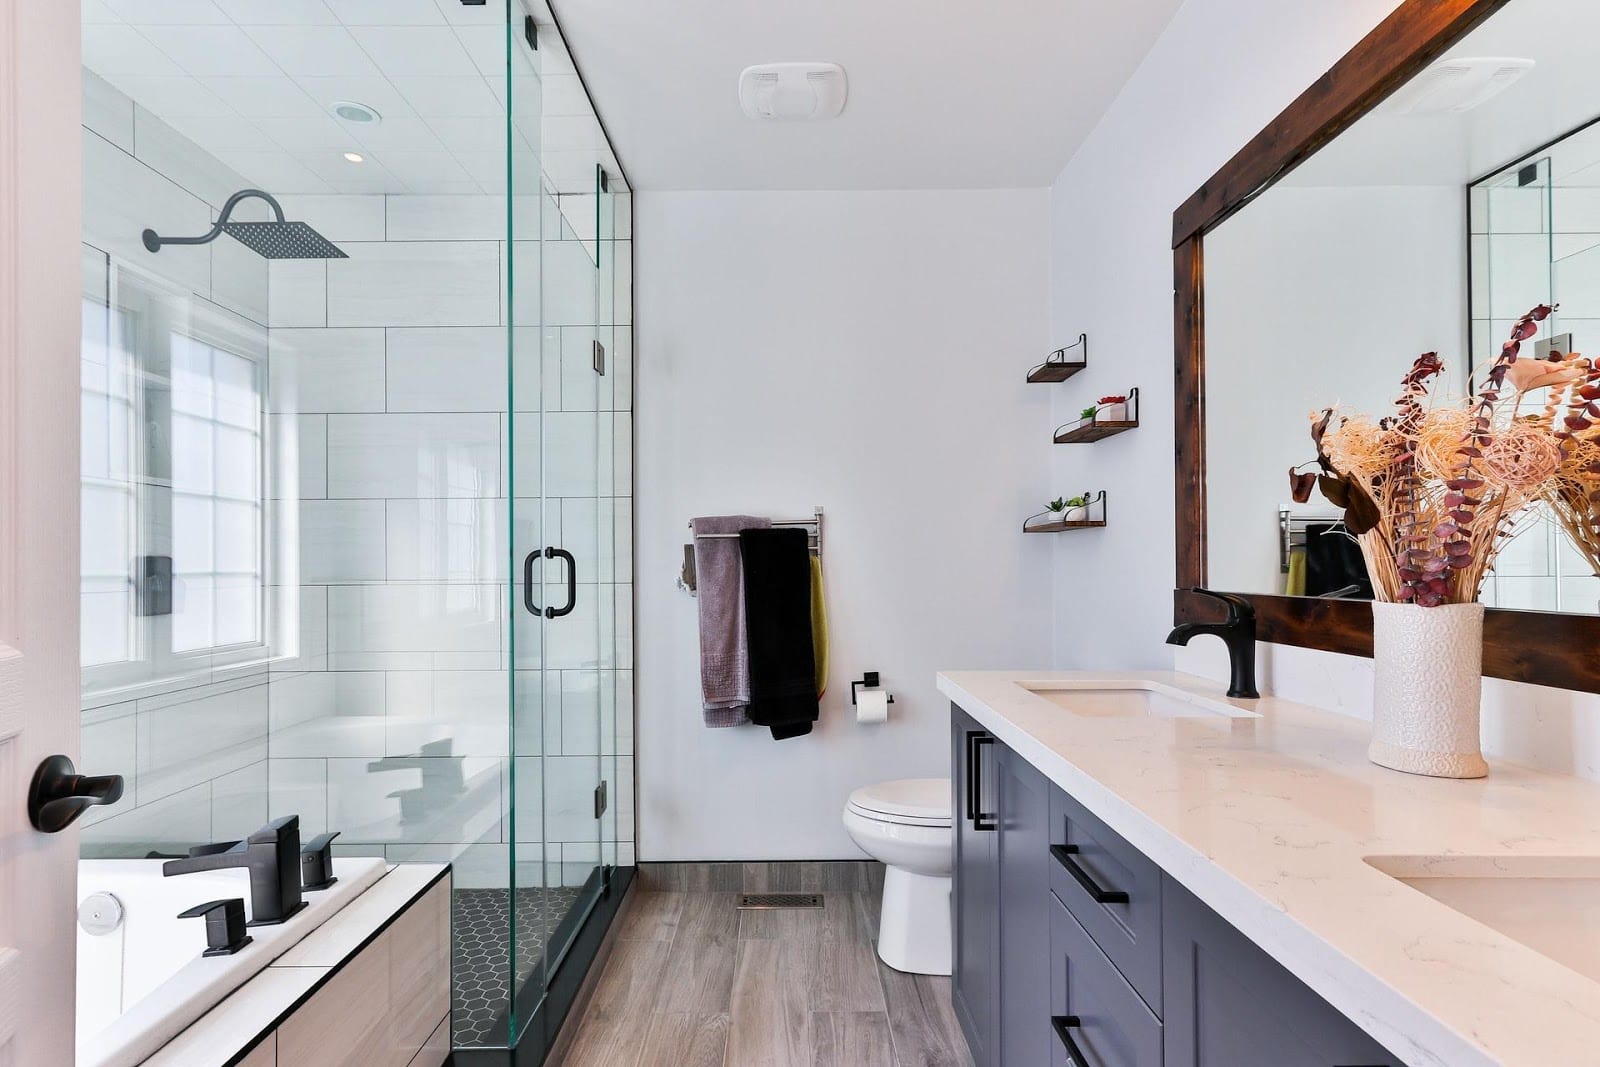 How Much Should You Invest in Your Bathroom Vanity?